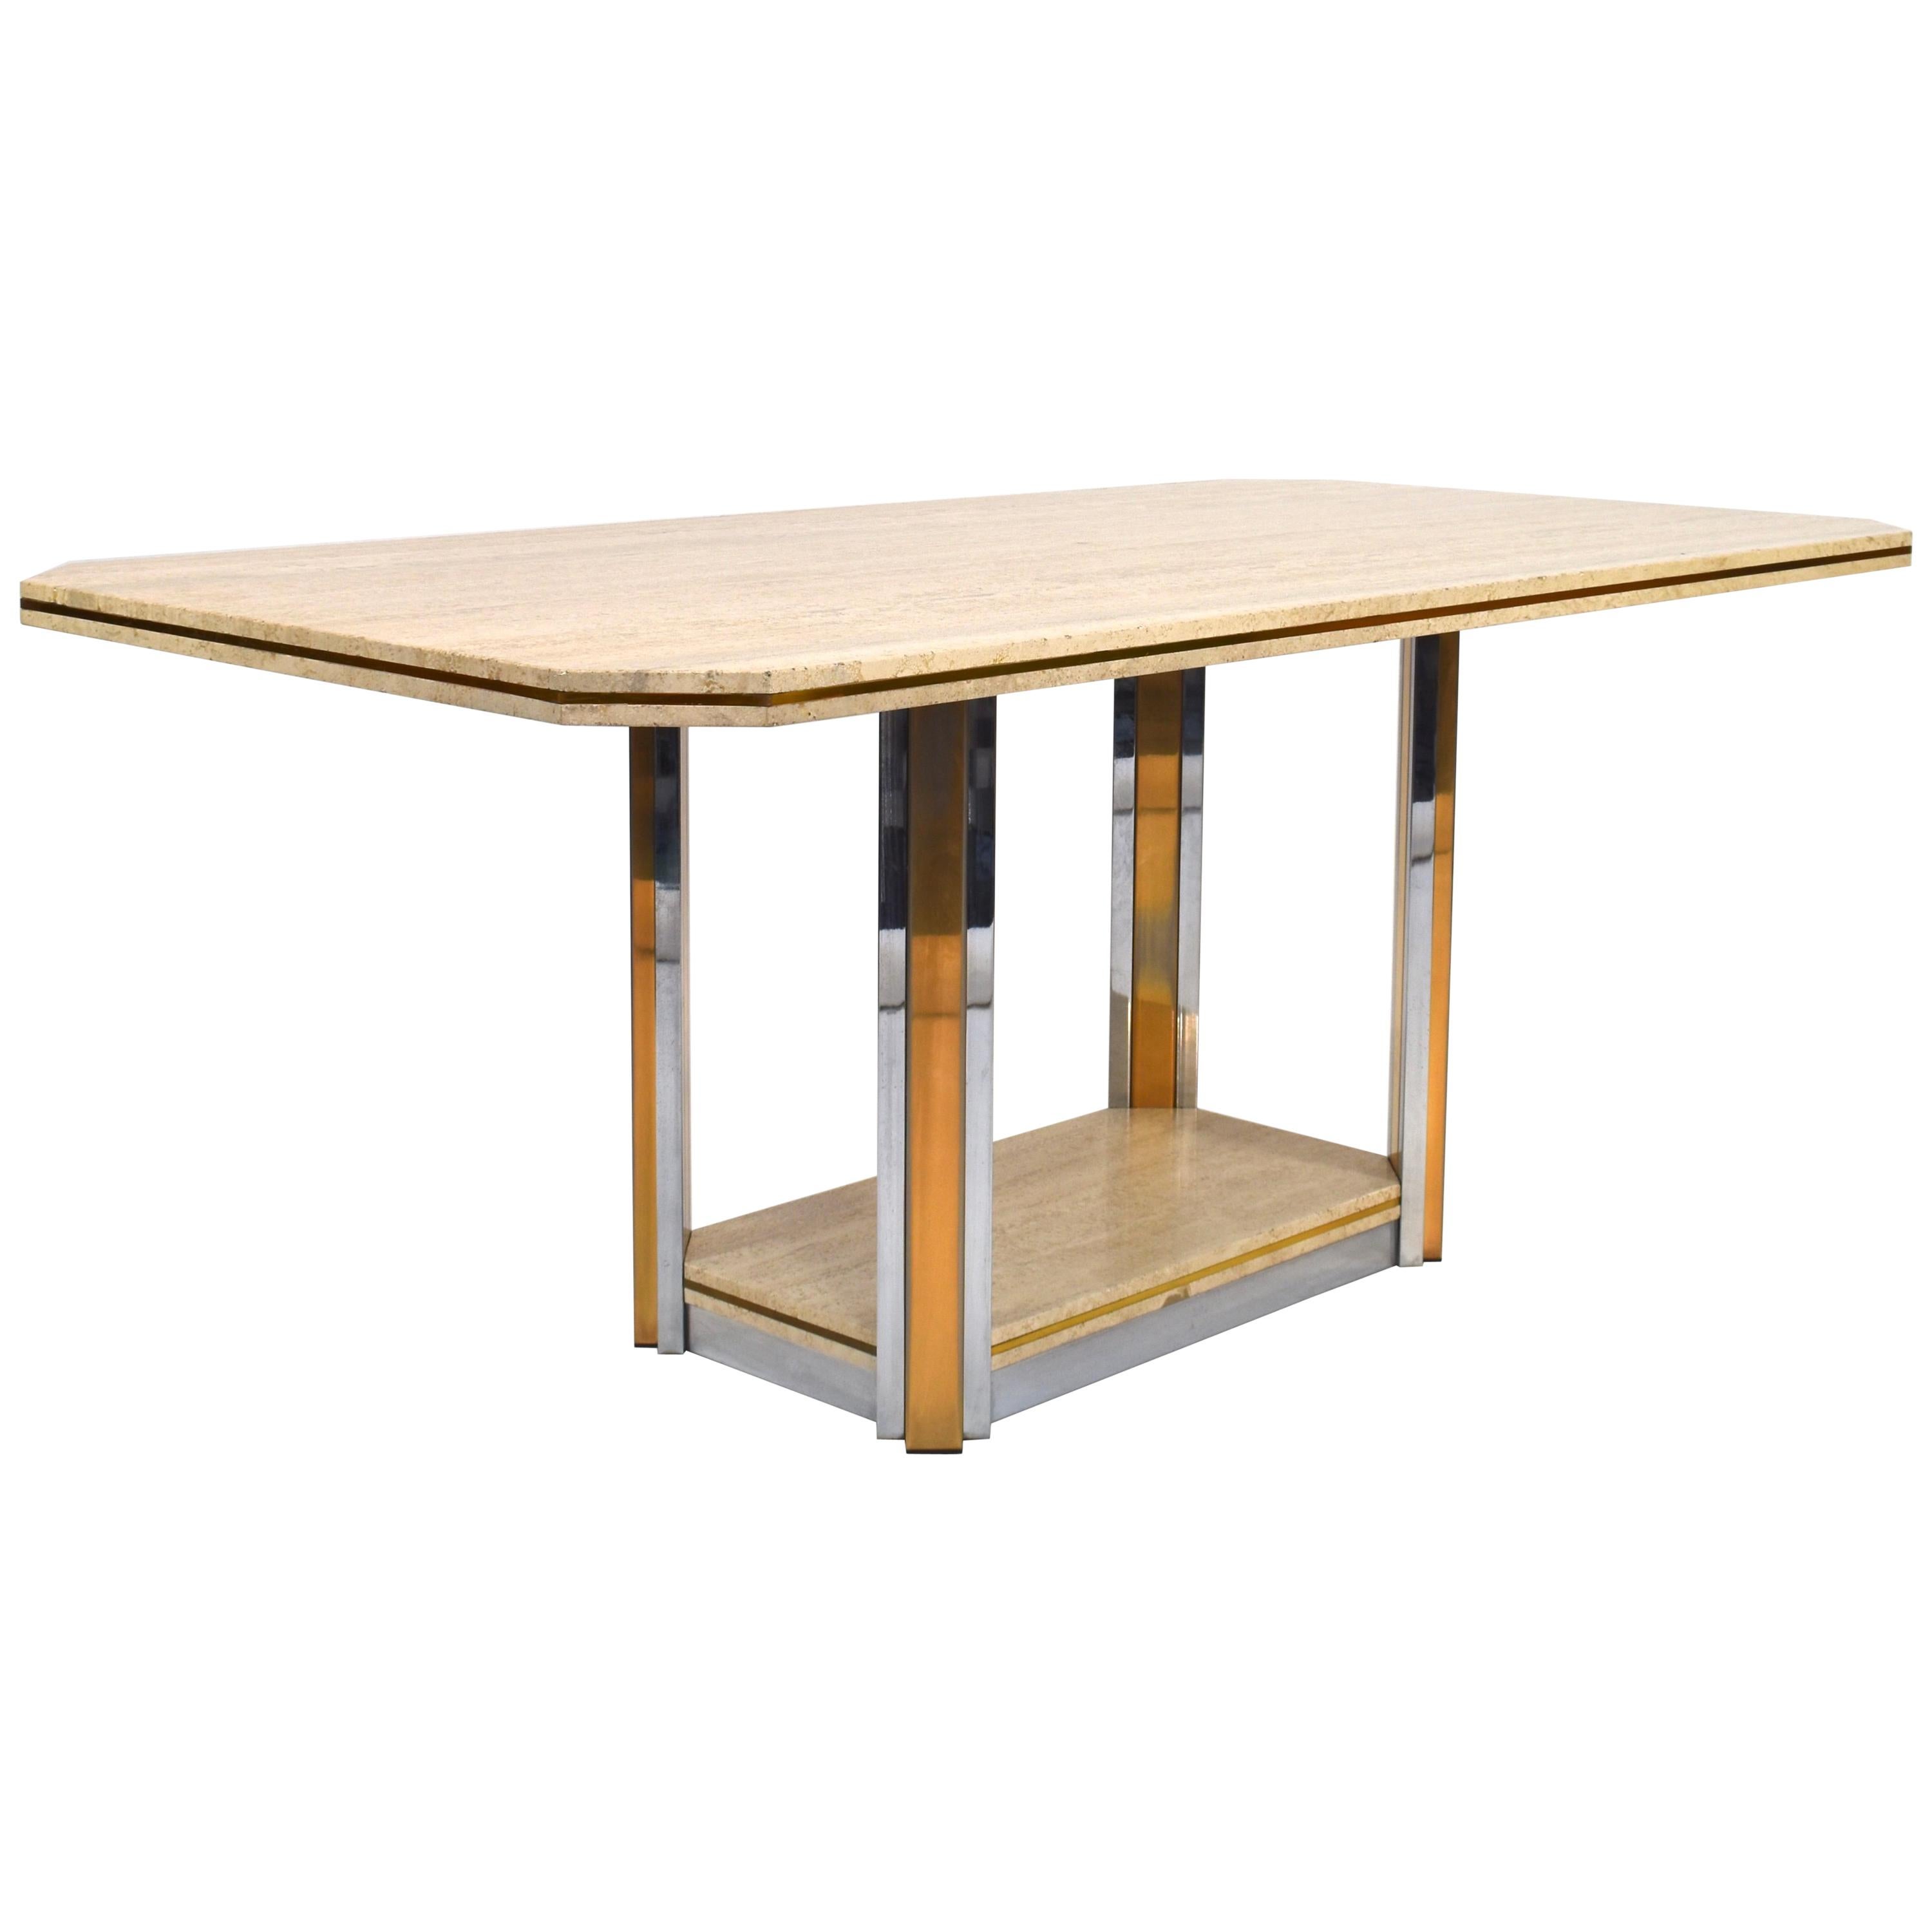 Willy Rizzo Style Dining Table in Travertine, Brass and Gold, 1970